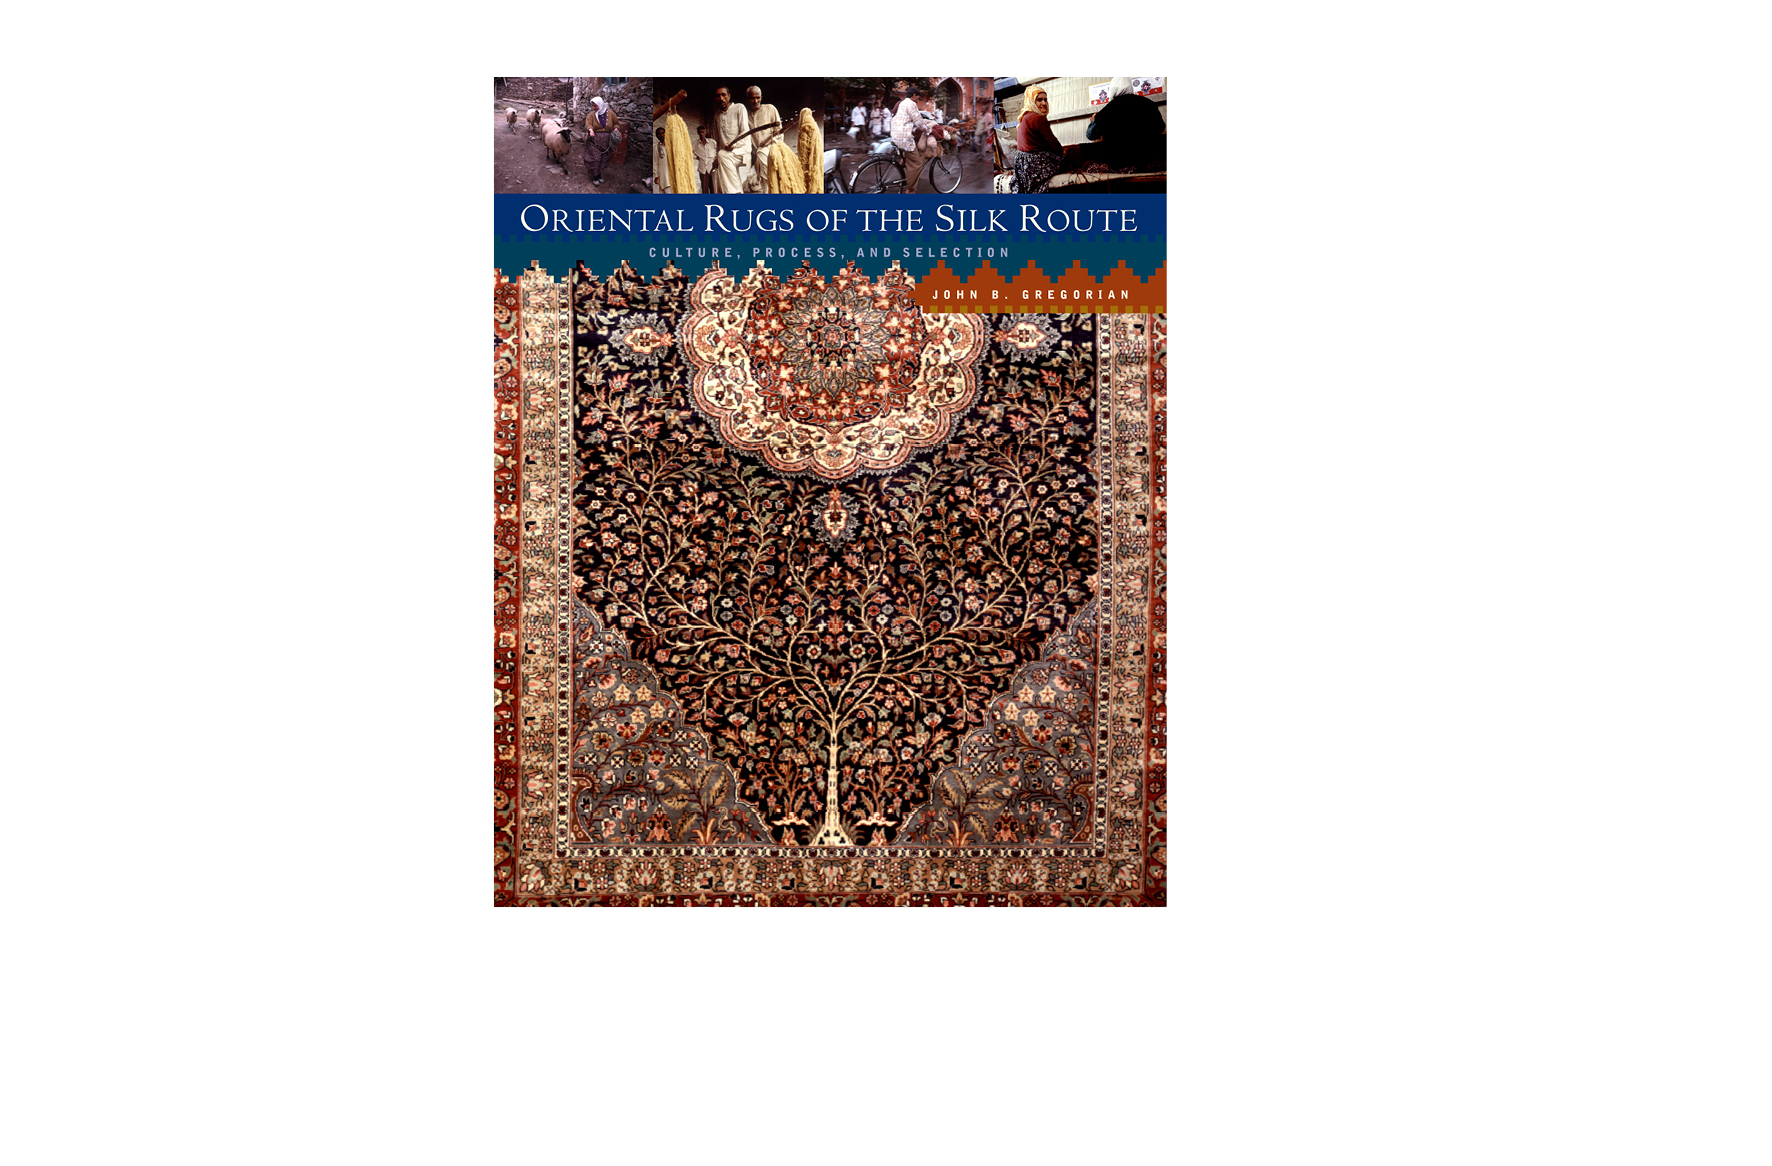   Oriental Rugs of the Silk Route -  9 X 11 in., 176 pg., hardcover with jacket. Design; Galen Smith // Publisher; Rizzoli     